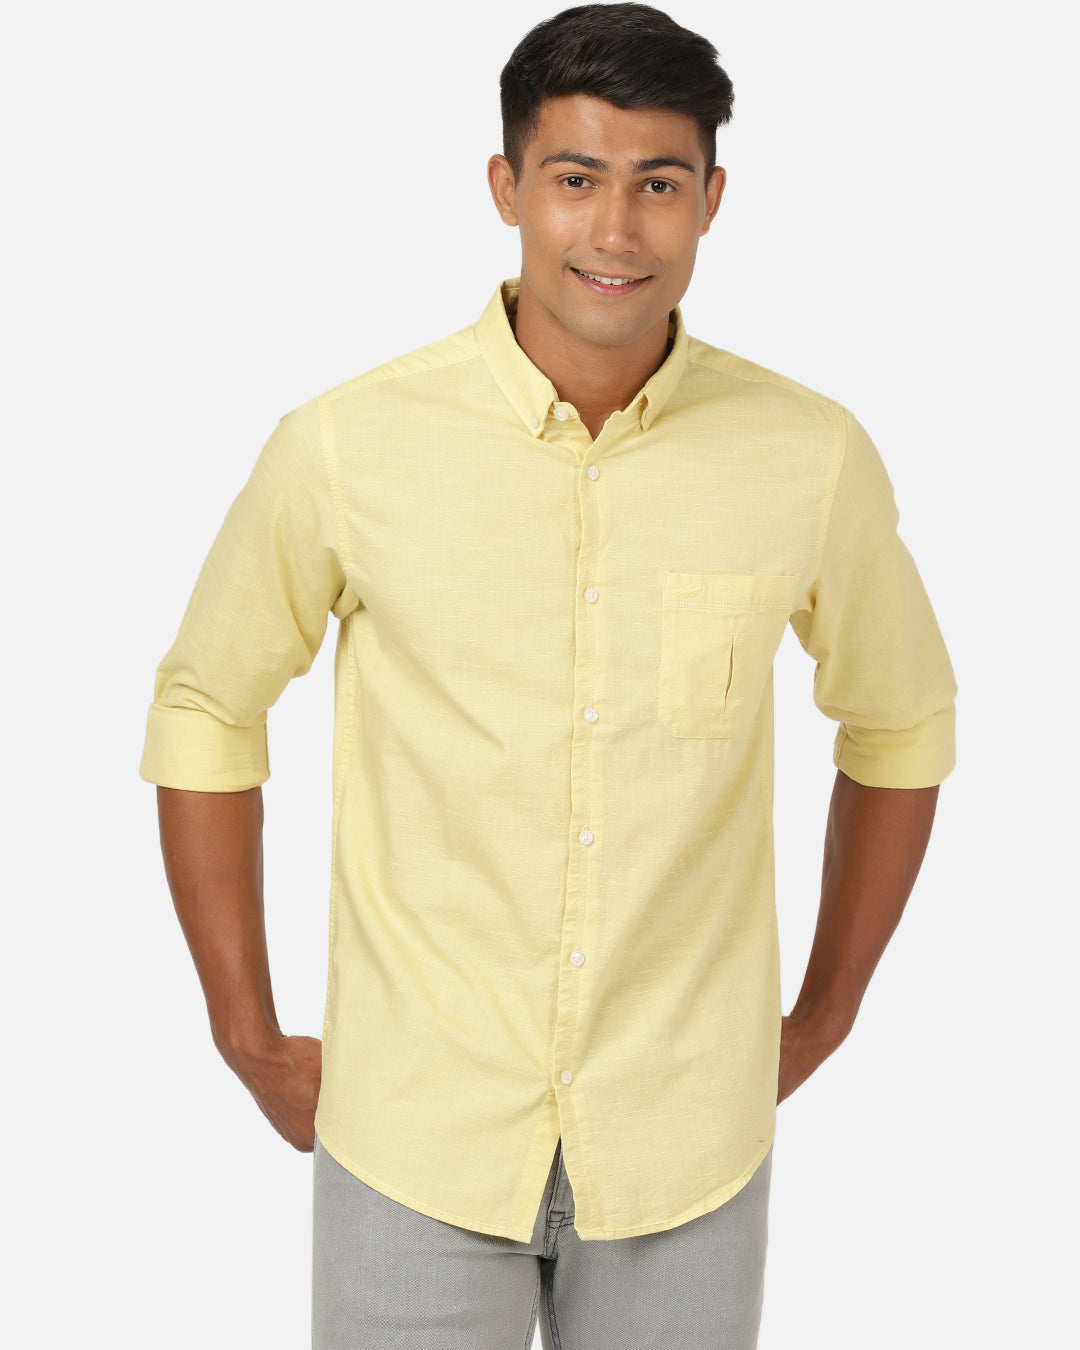 Crocodile Casual Full Sleeve Slim Fit Solid Lemon with Collar Shirt for Men